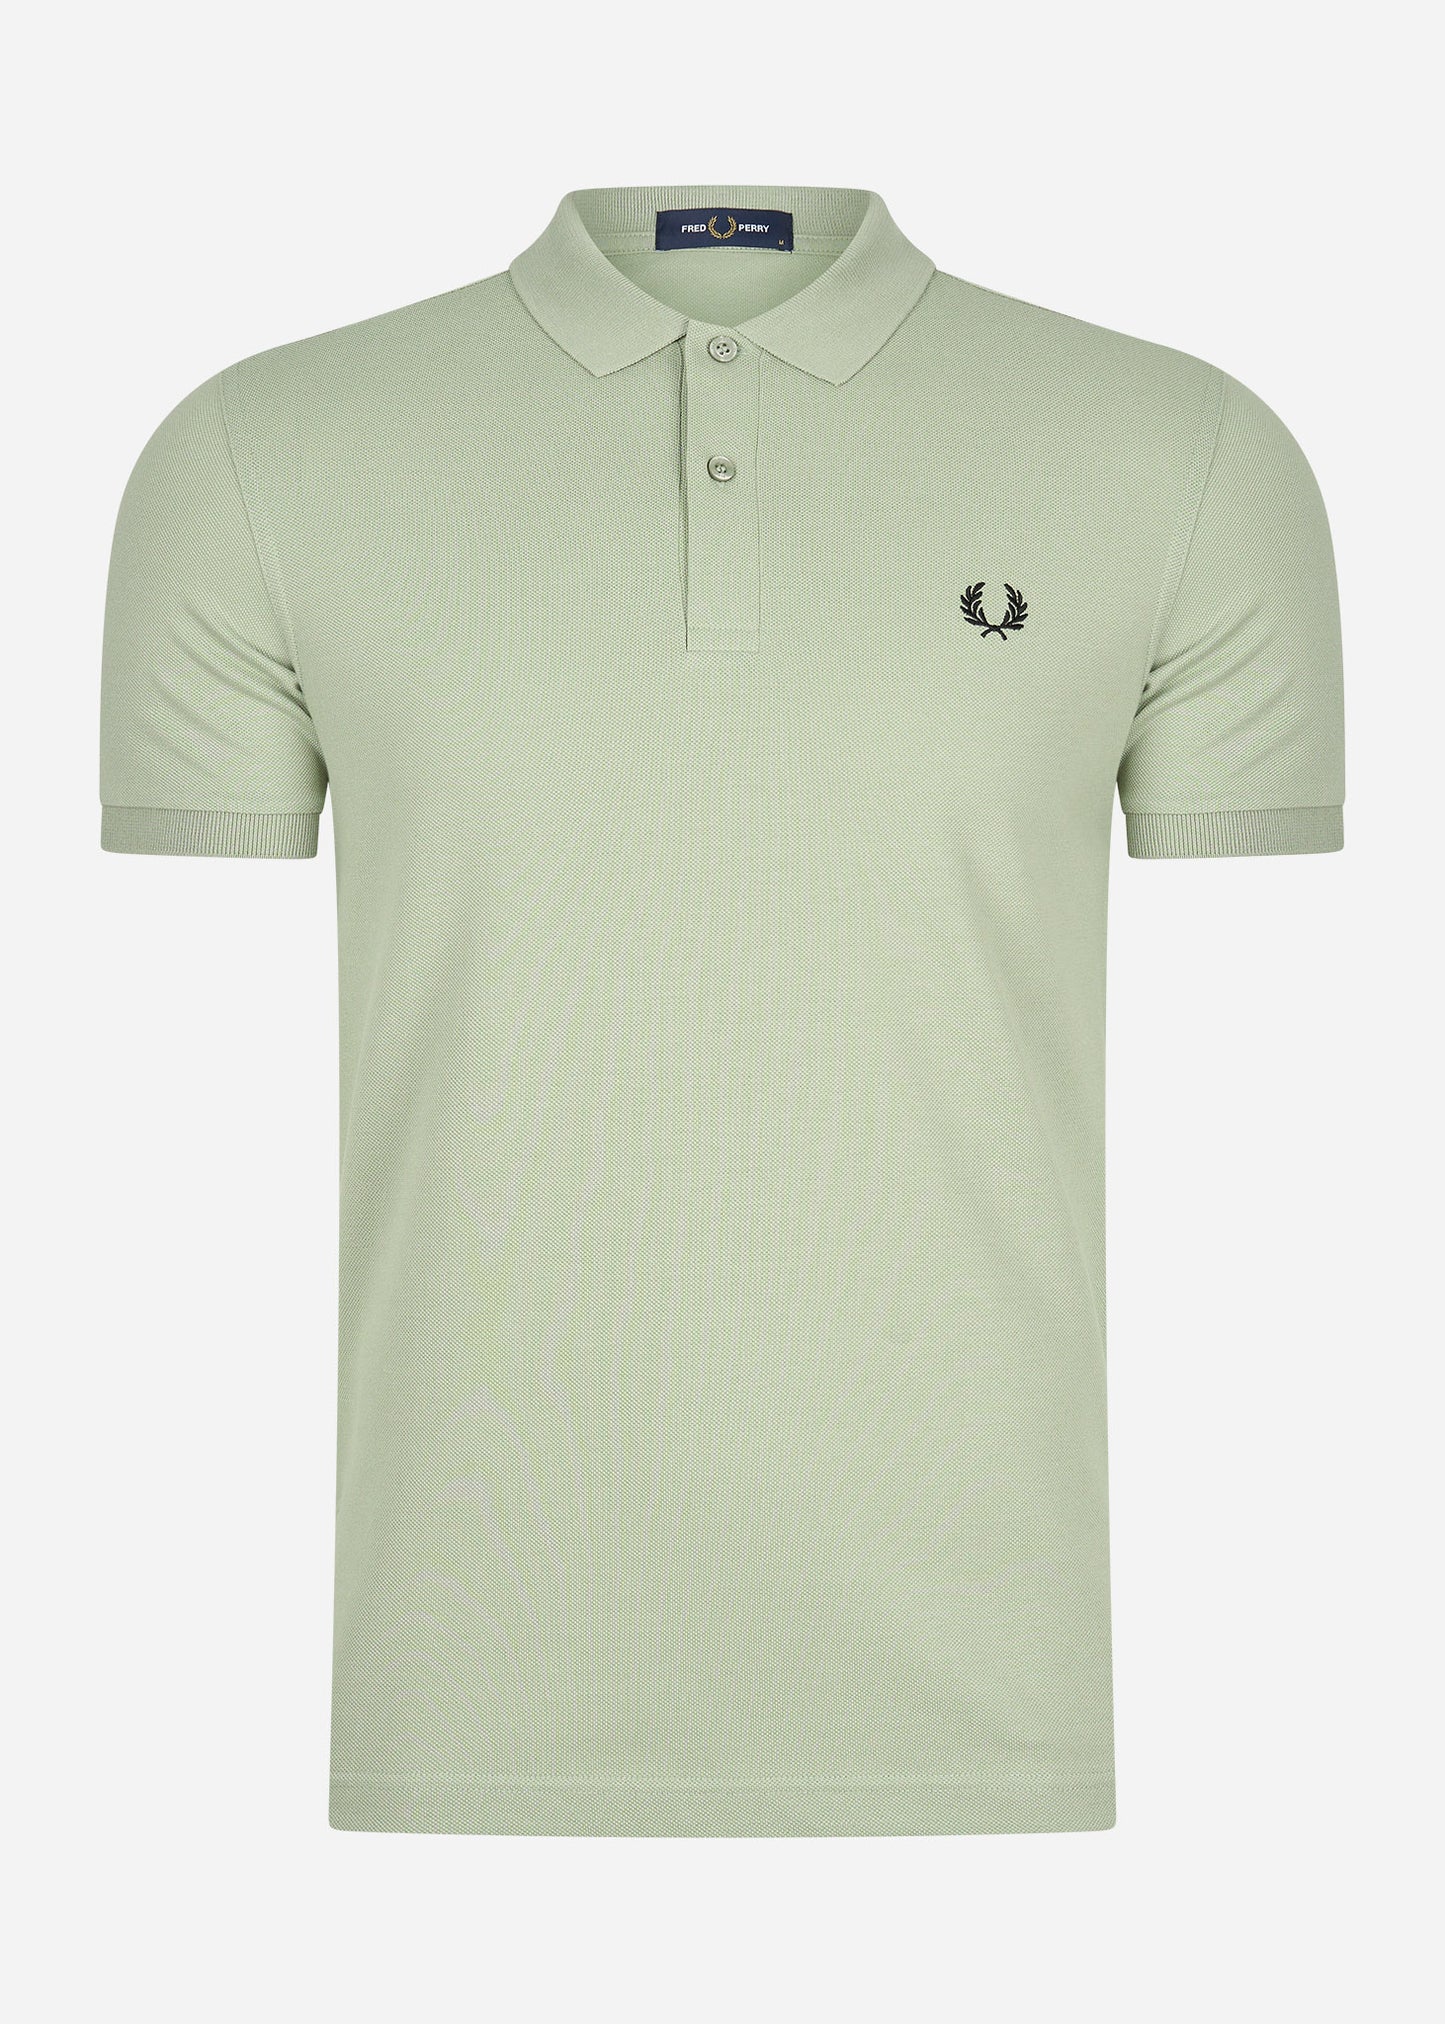 Plain Fred Perry shirt - seagrass